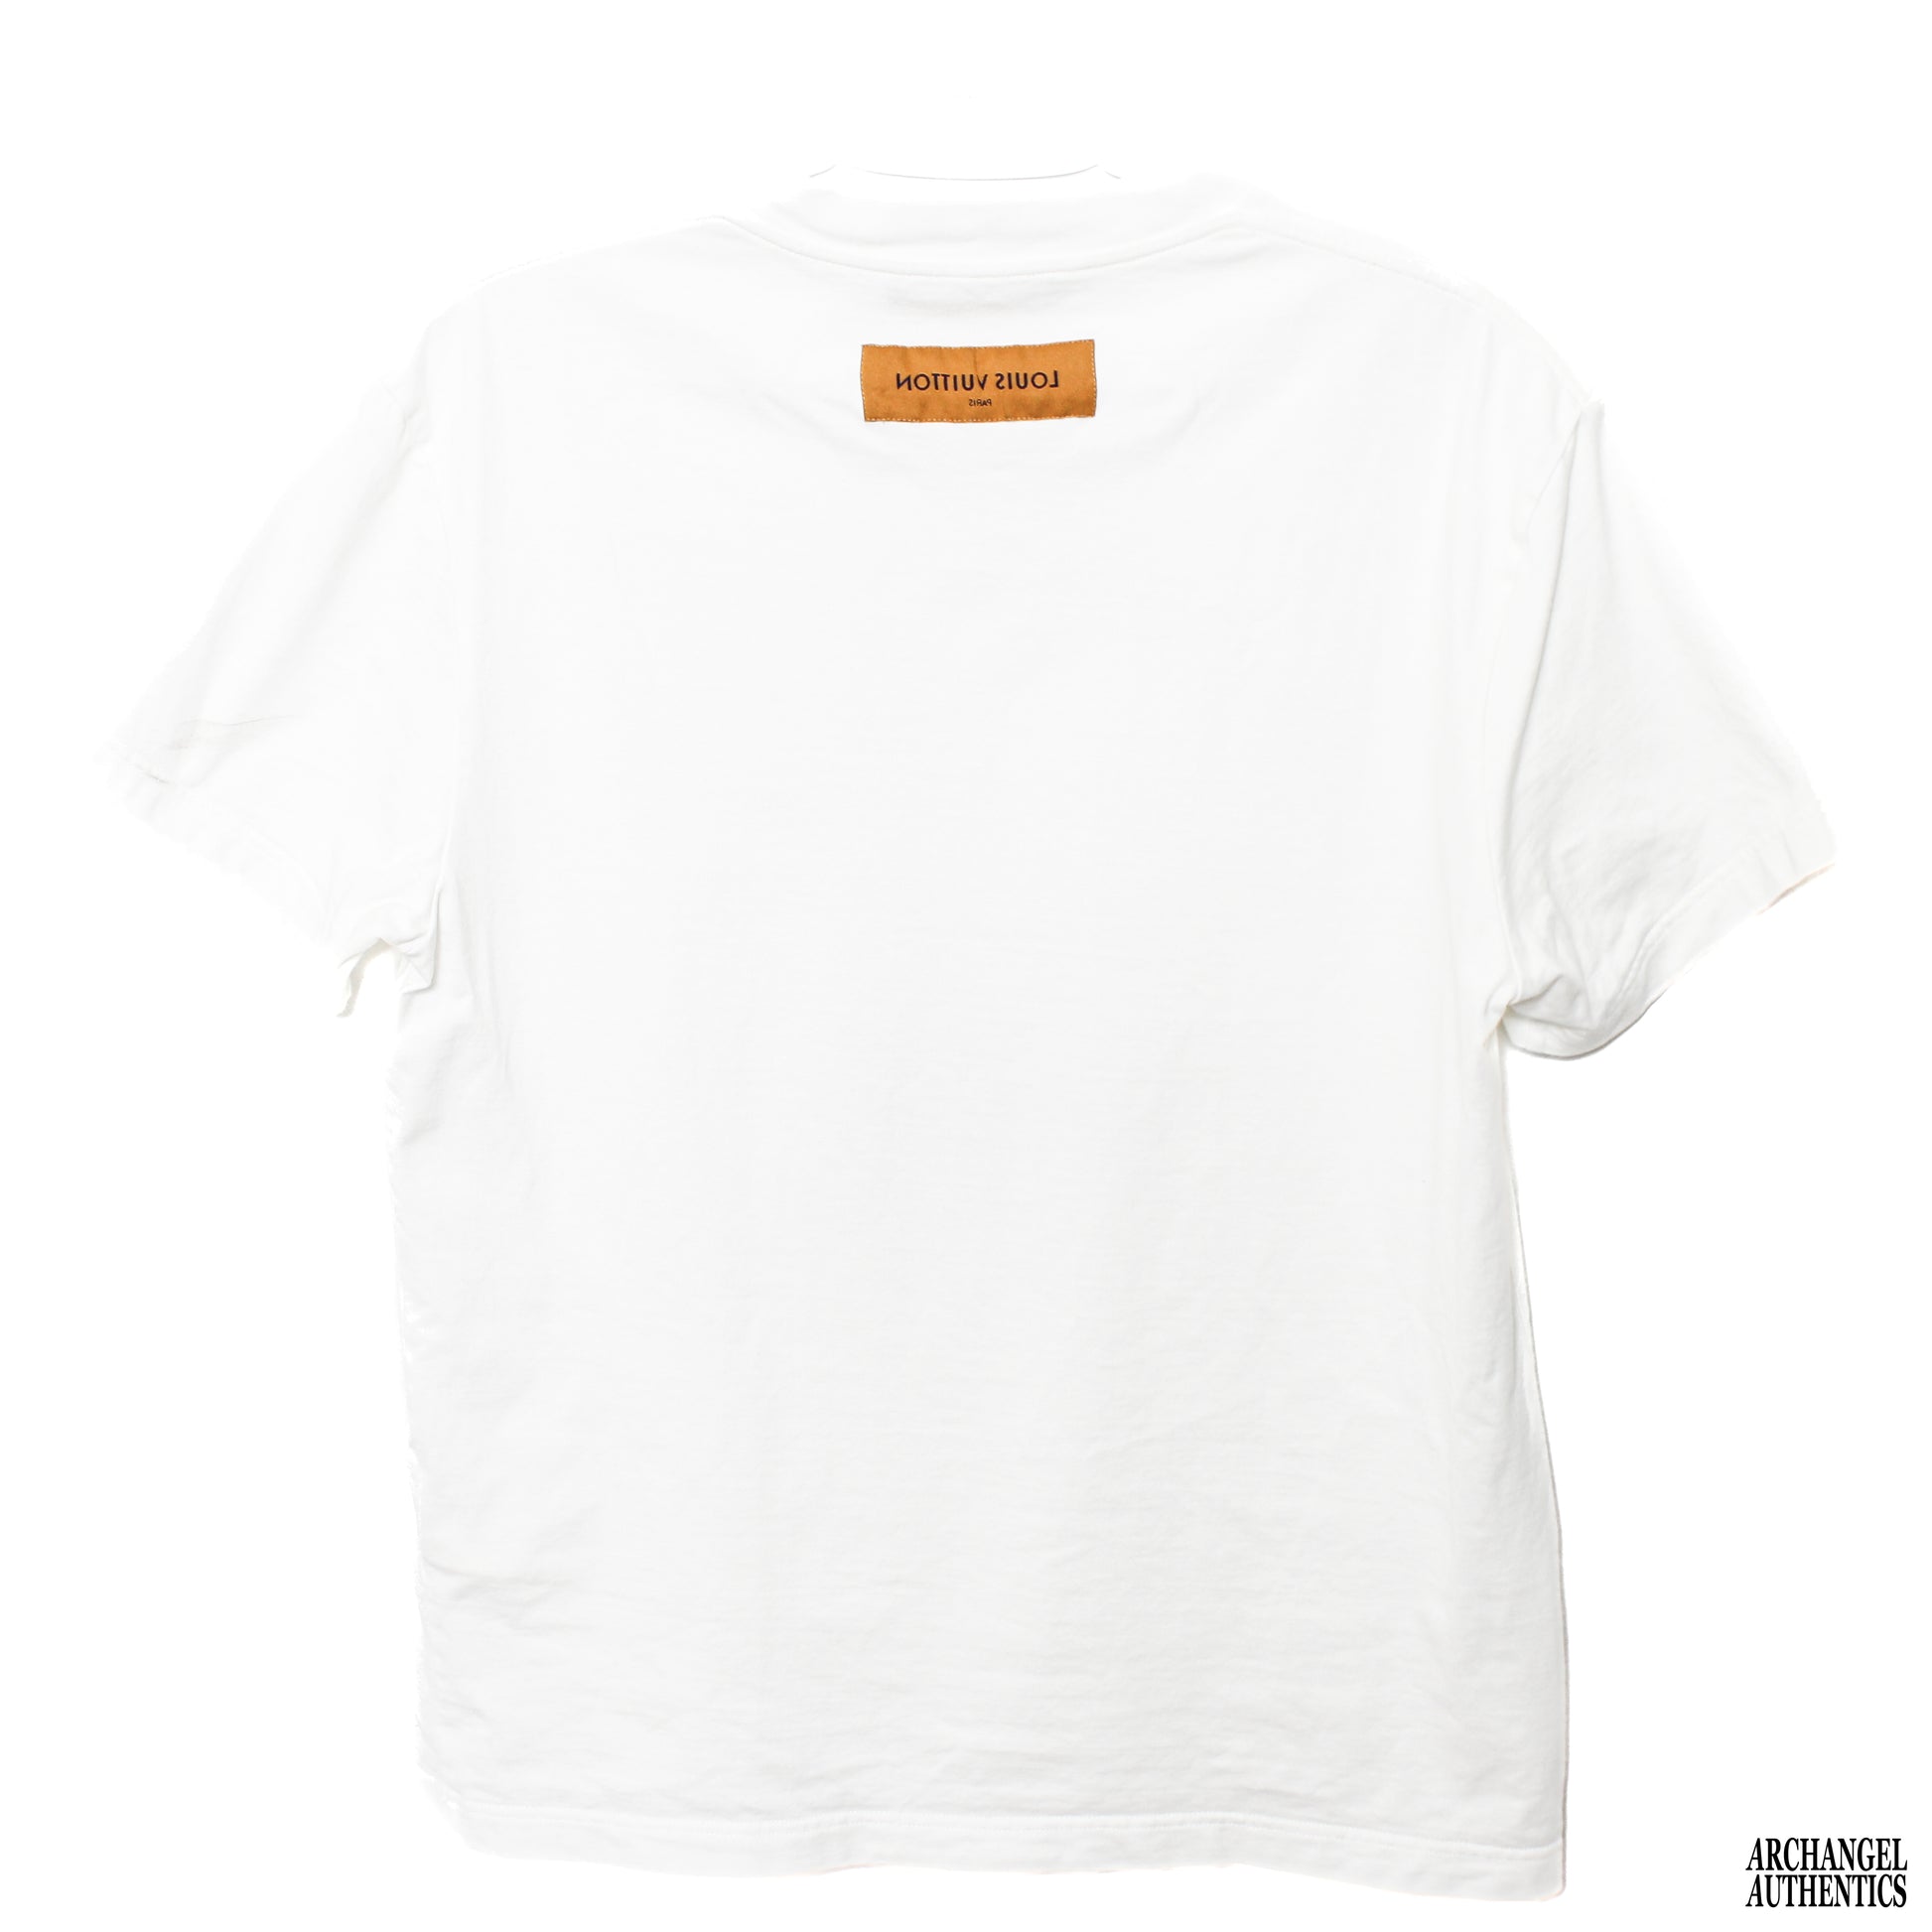 Louis Vuitton Virgil Abloh tee shirt, Brand new with